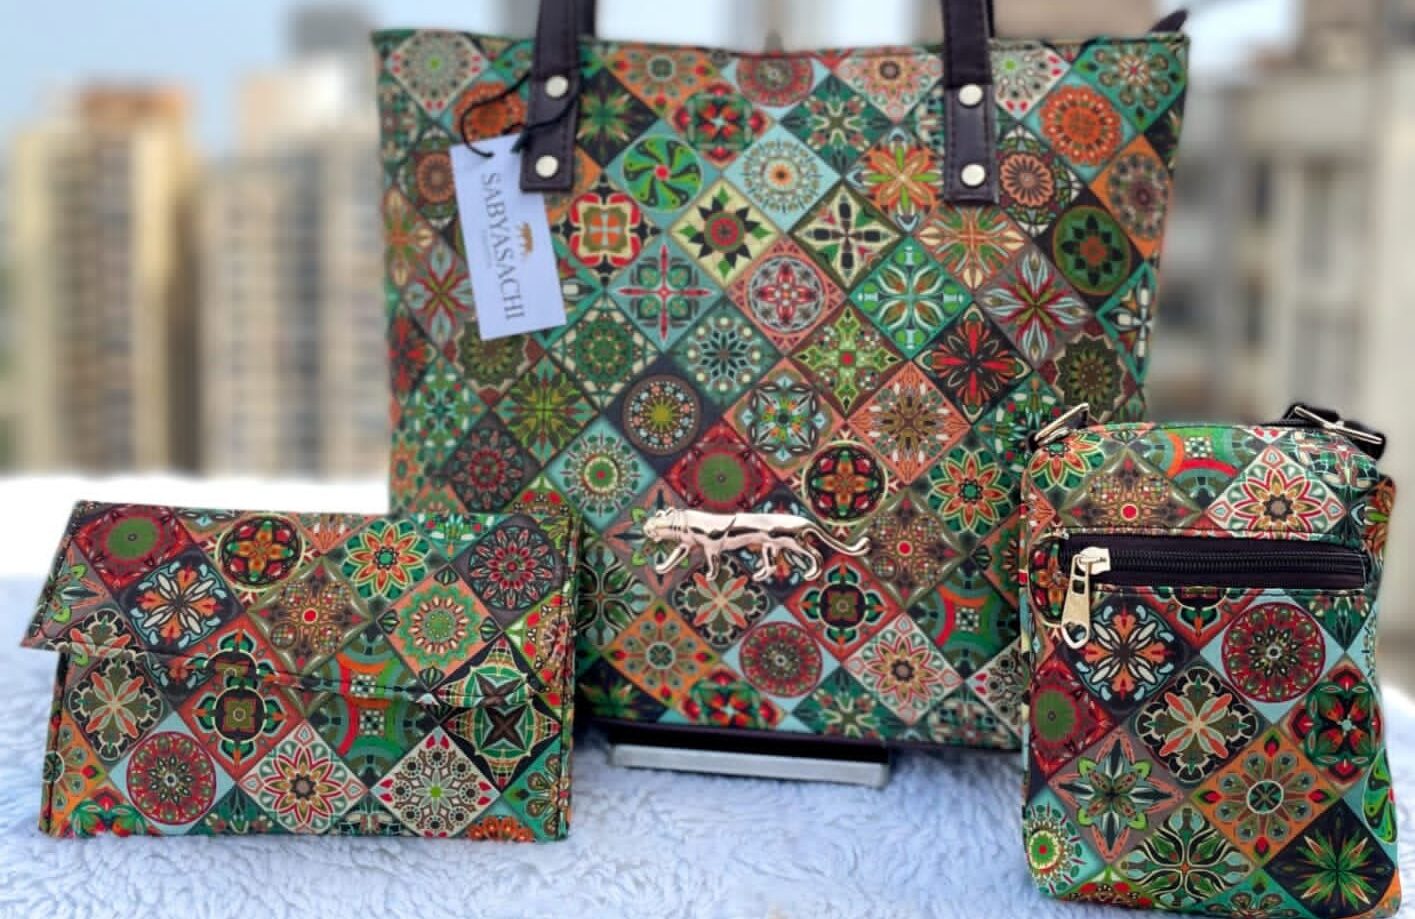 Handcrafted hand bags